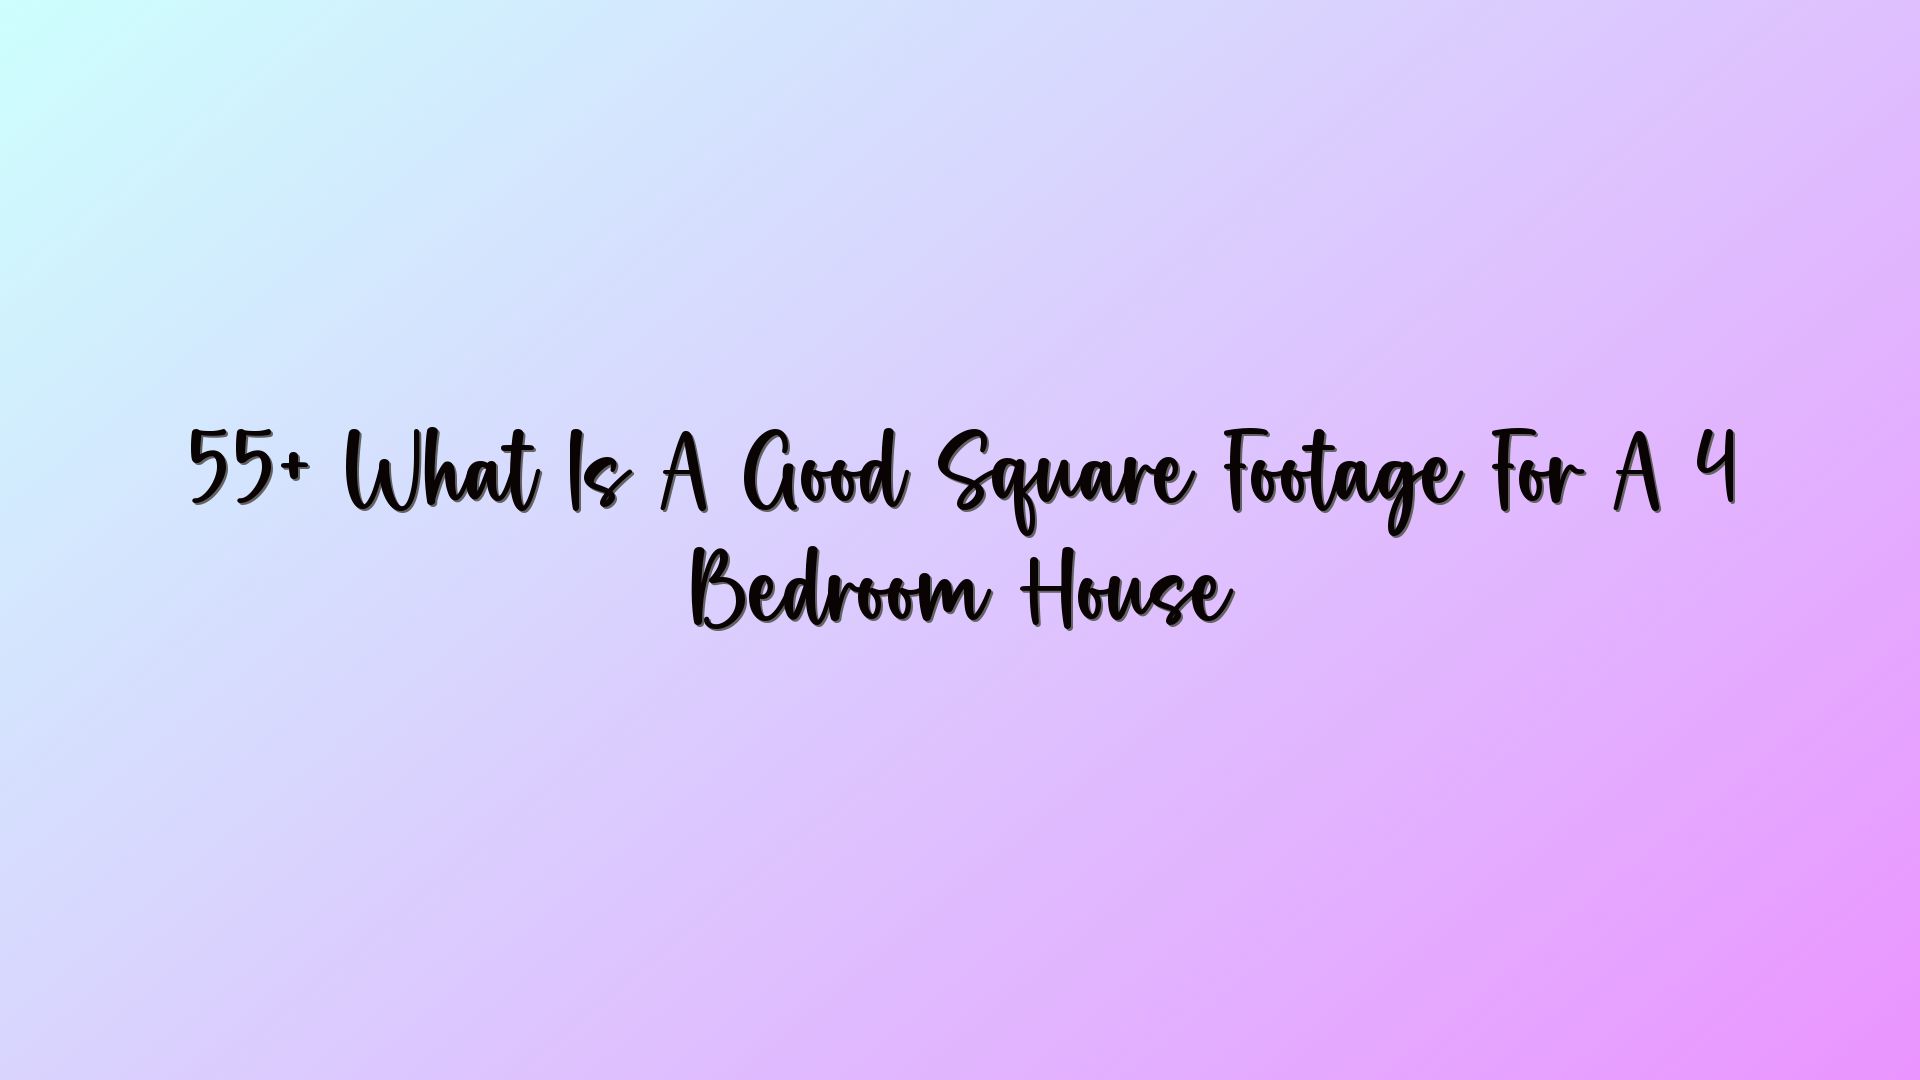 55+ What Is A Good Square Footage For A 4 Bedroom House